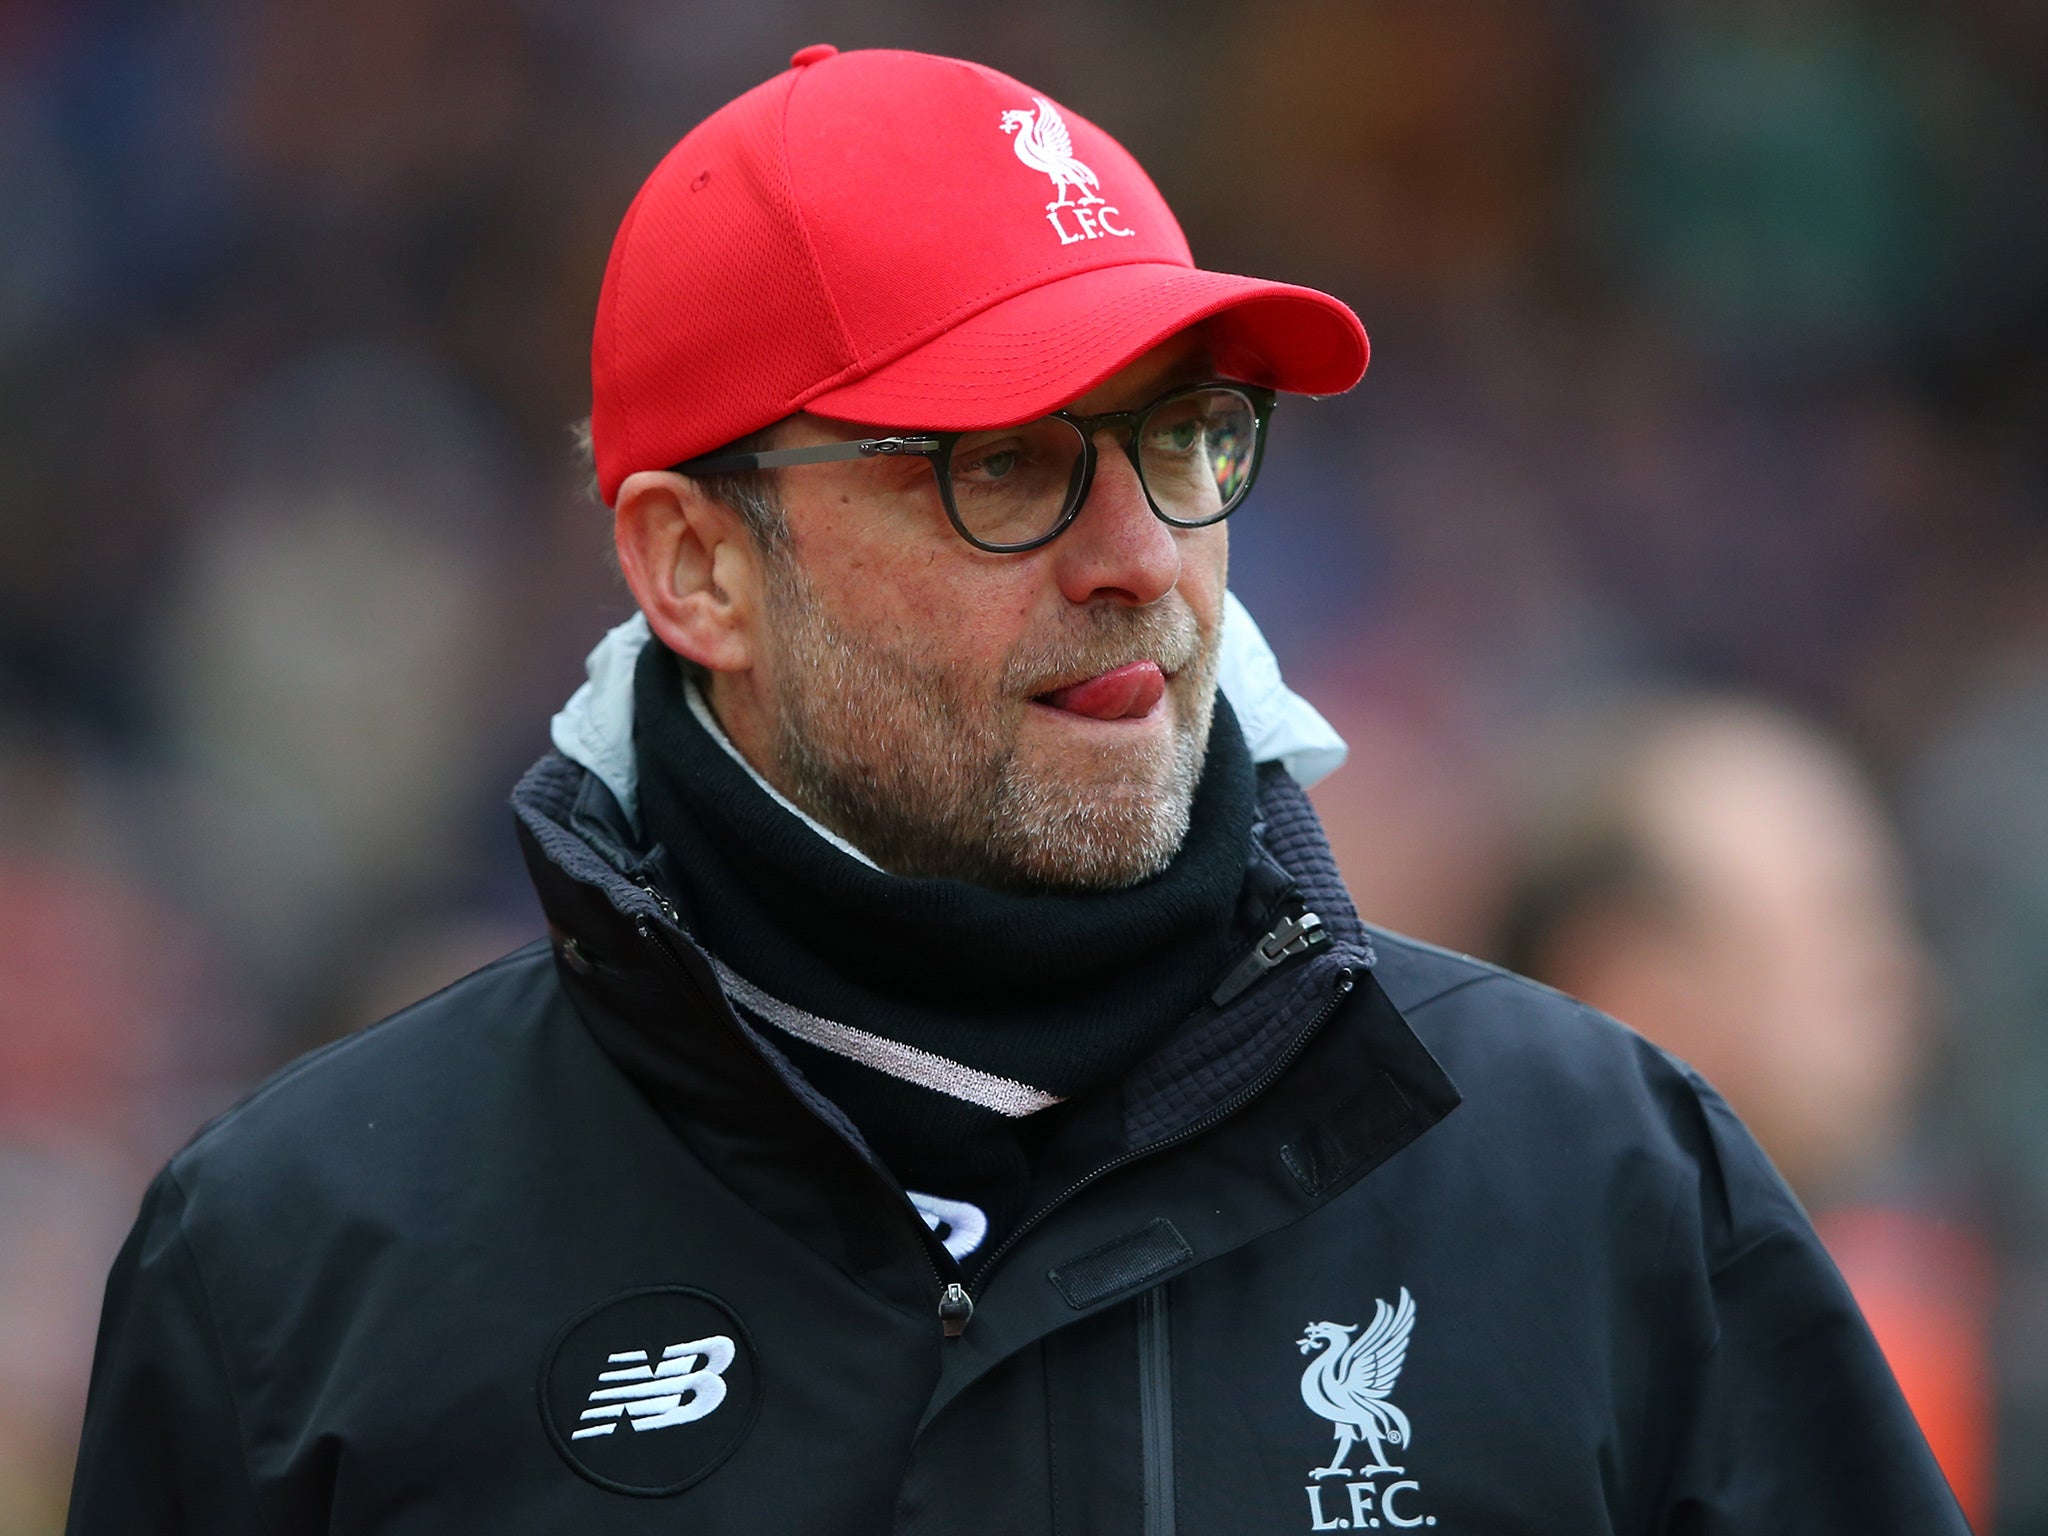 Jurgen Klopp did not let back-to-back defeats affect his team selection